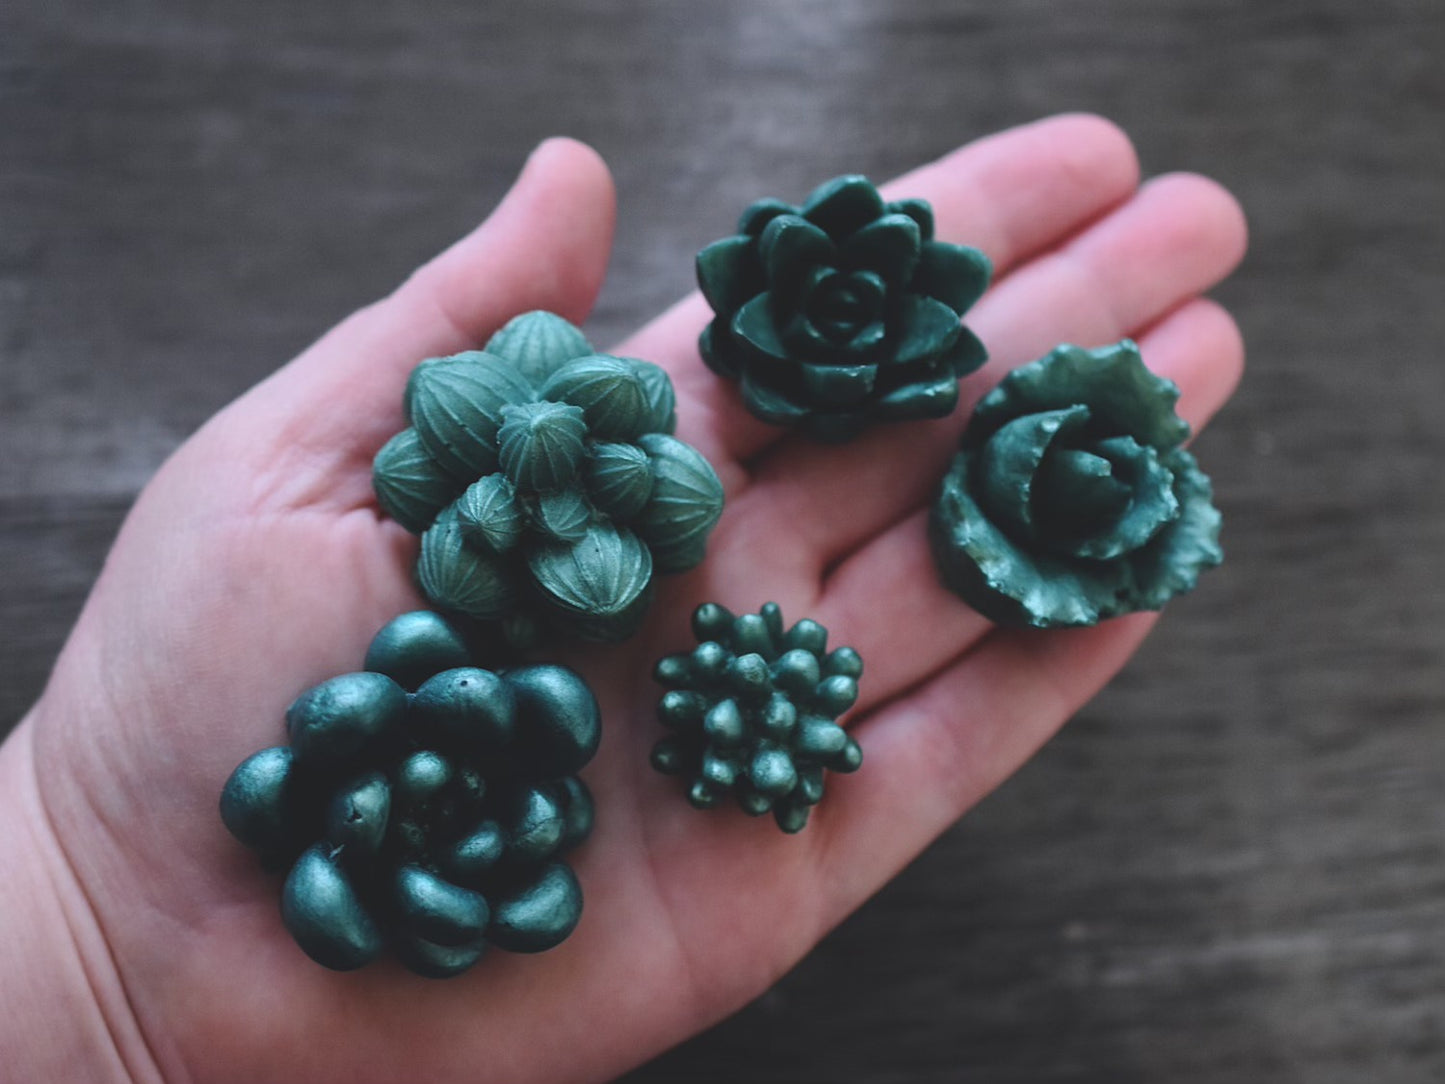 A hand holding the five completed soap succlents. The succulents have been colored green.